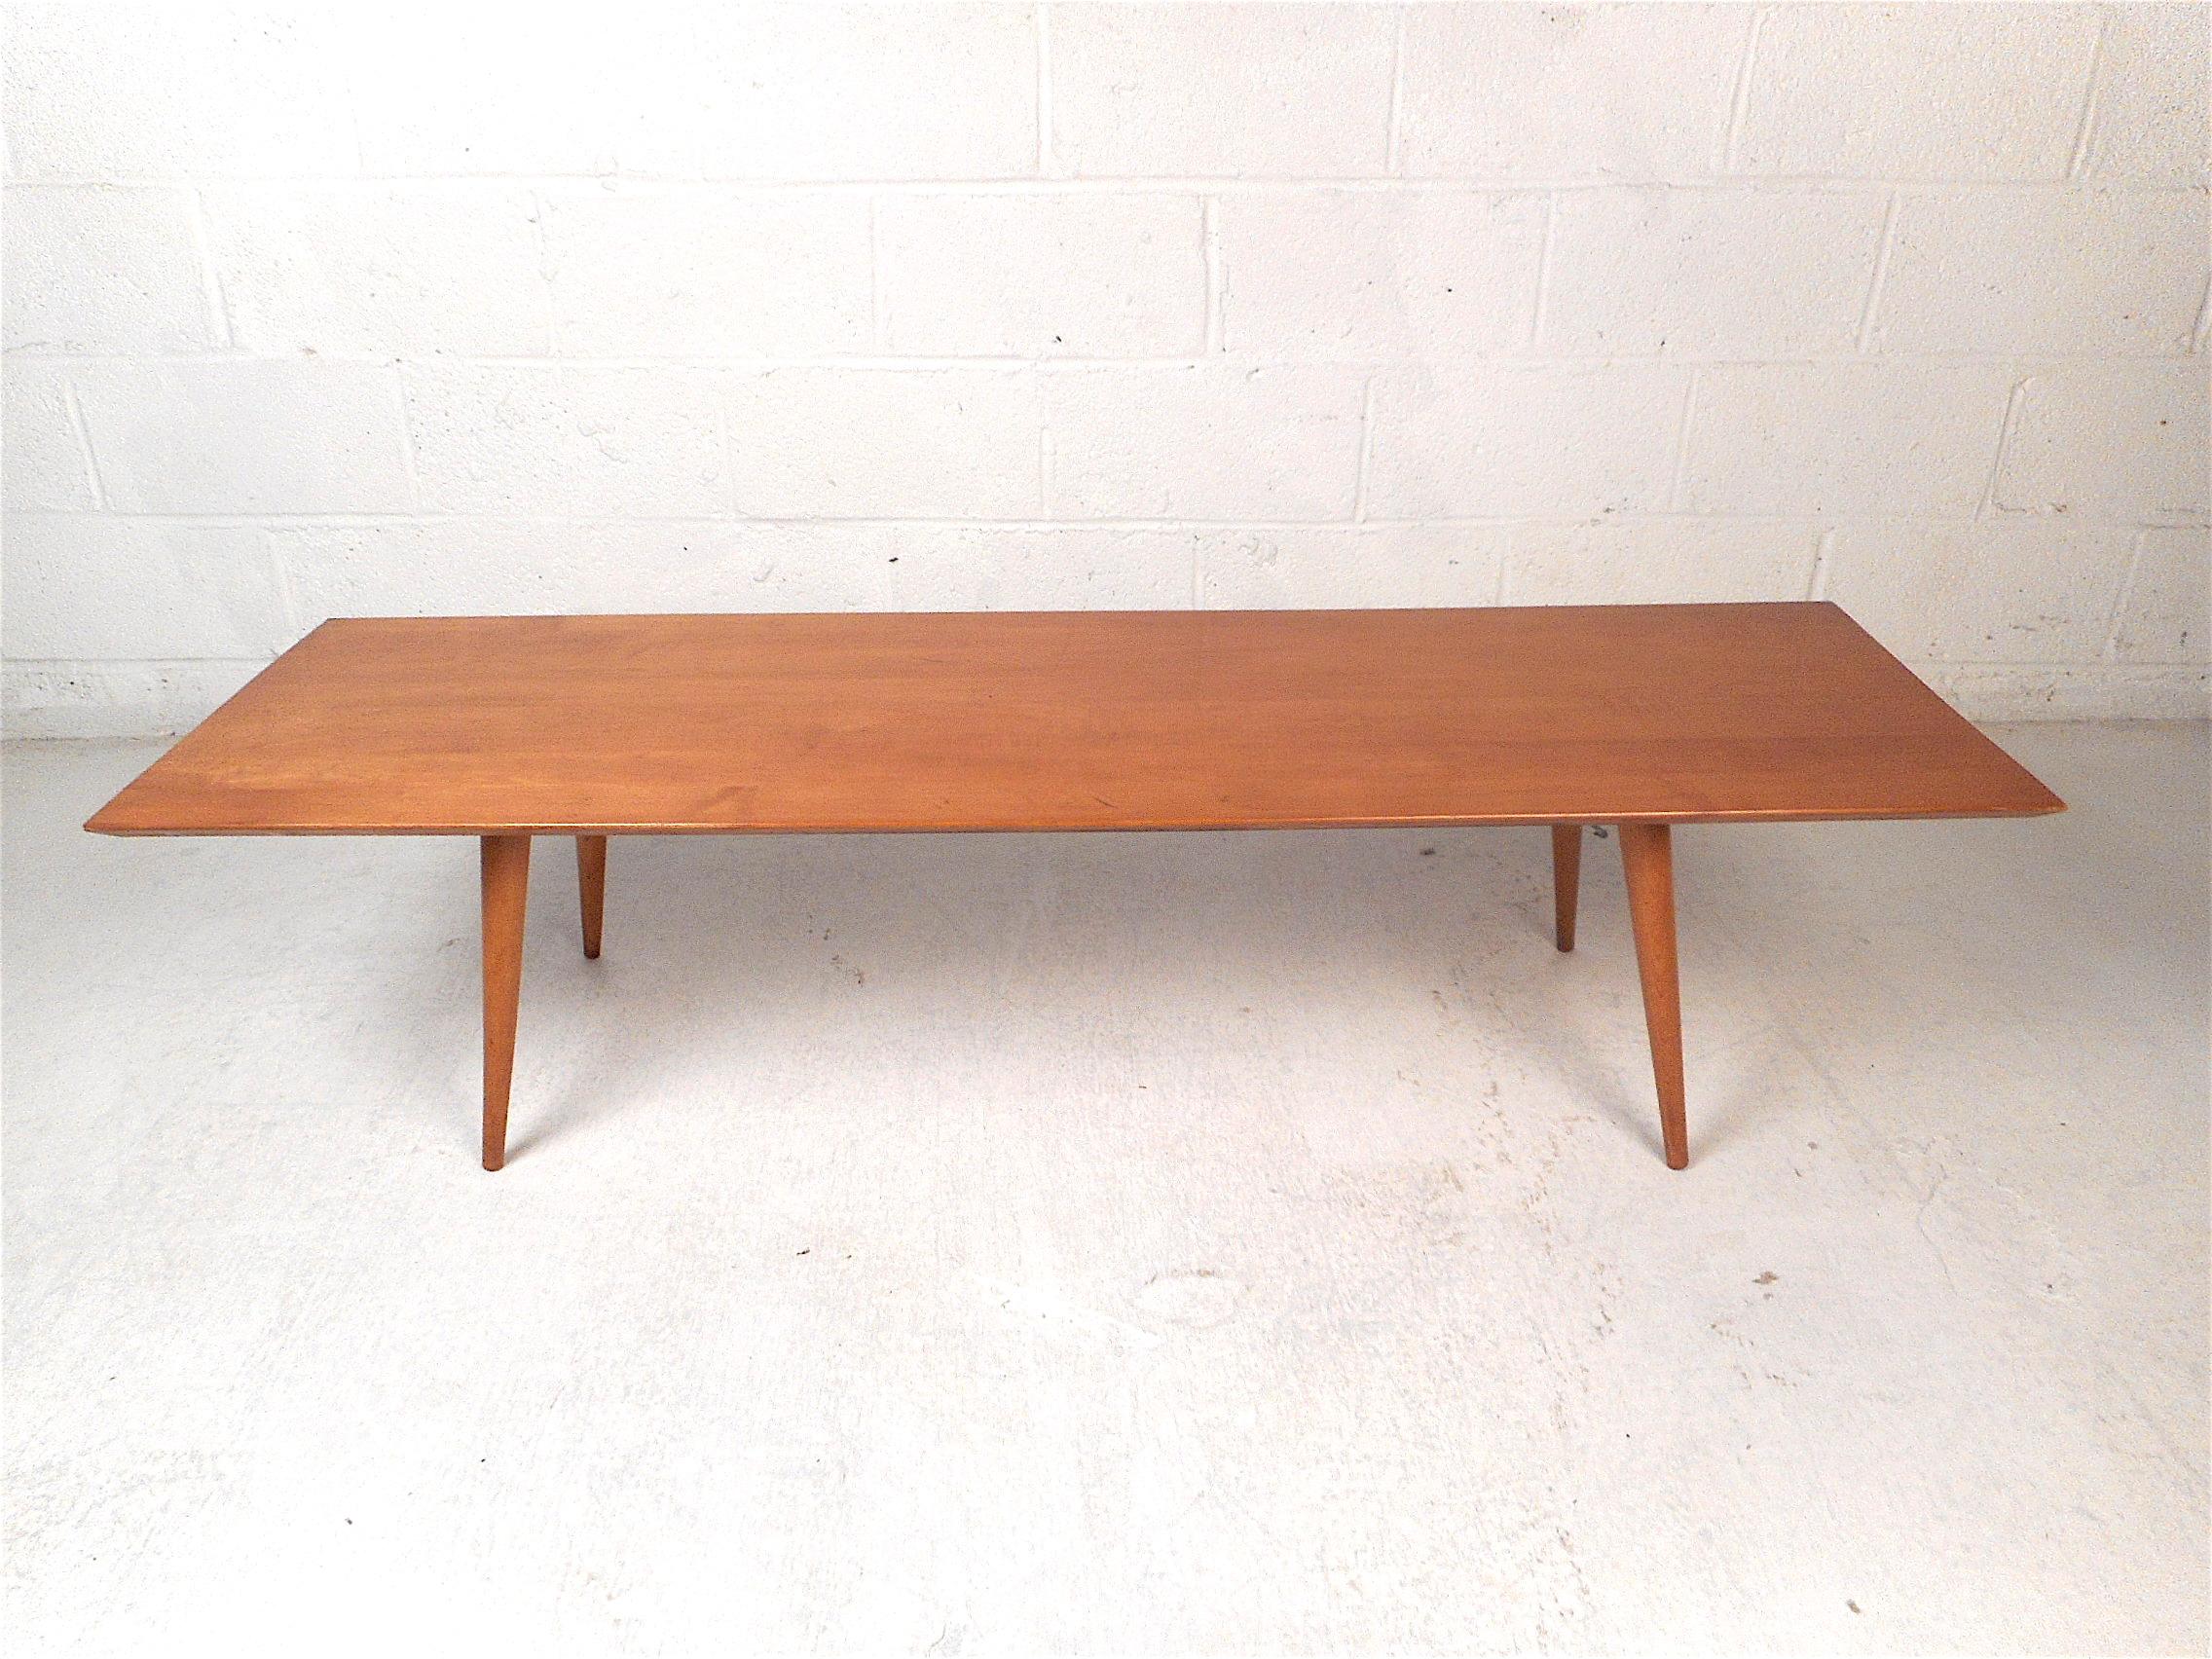 Stylish midcentury coffee table. Sturdy maple wood construction. Sleek, slim tabletop supported by splayed and tapered legs. Designed by Paul McCobb, circa 1960s. Please confirm item location with dealer (NJ or NY).